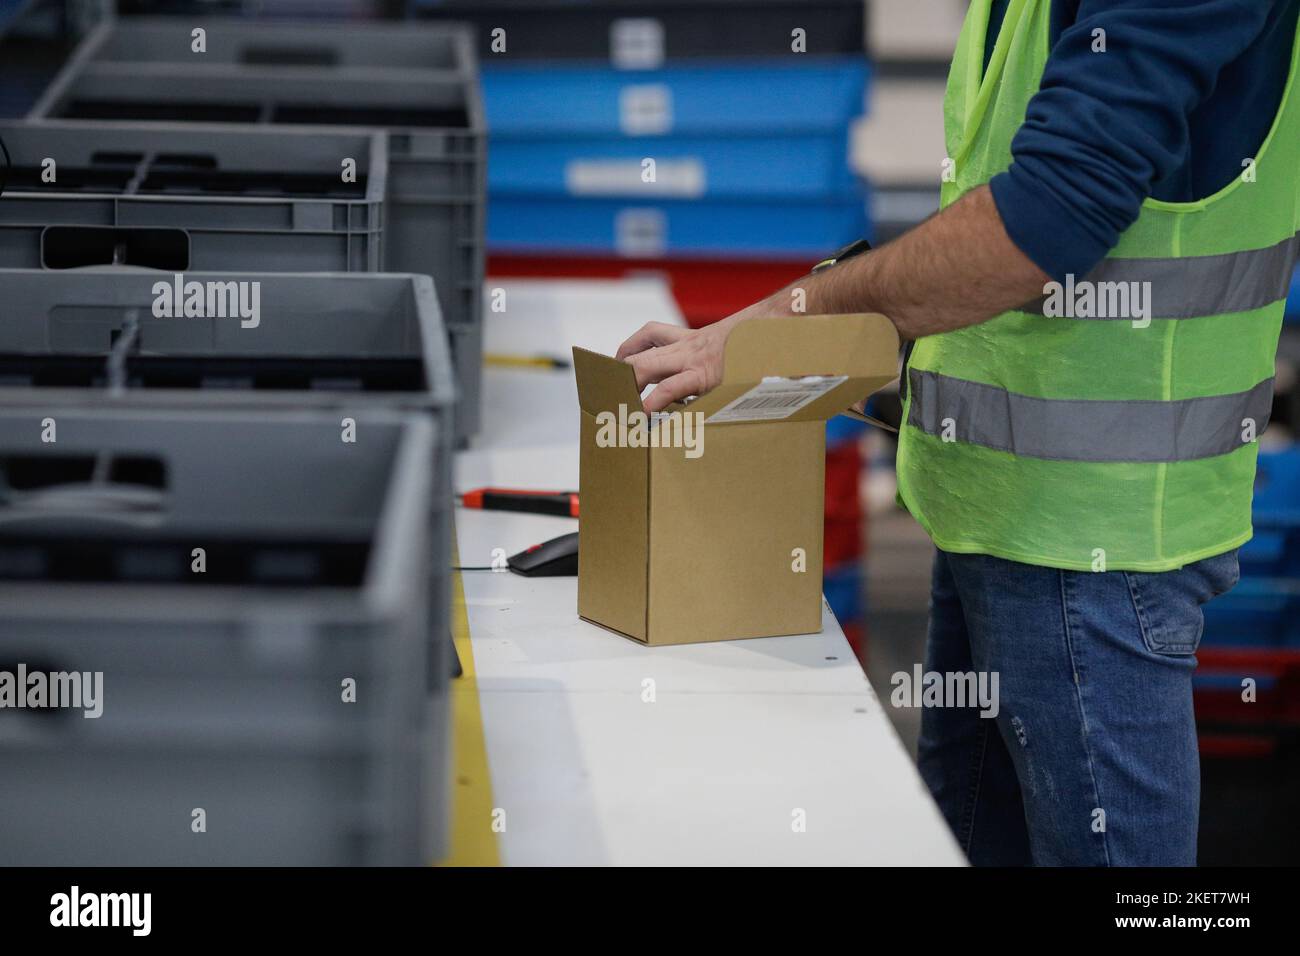 Bucharest, Romania - November 7, 2022: Shallow depth of field (selective focus) details a man working in an e-commerce and delivery company. Stock Photo